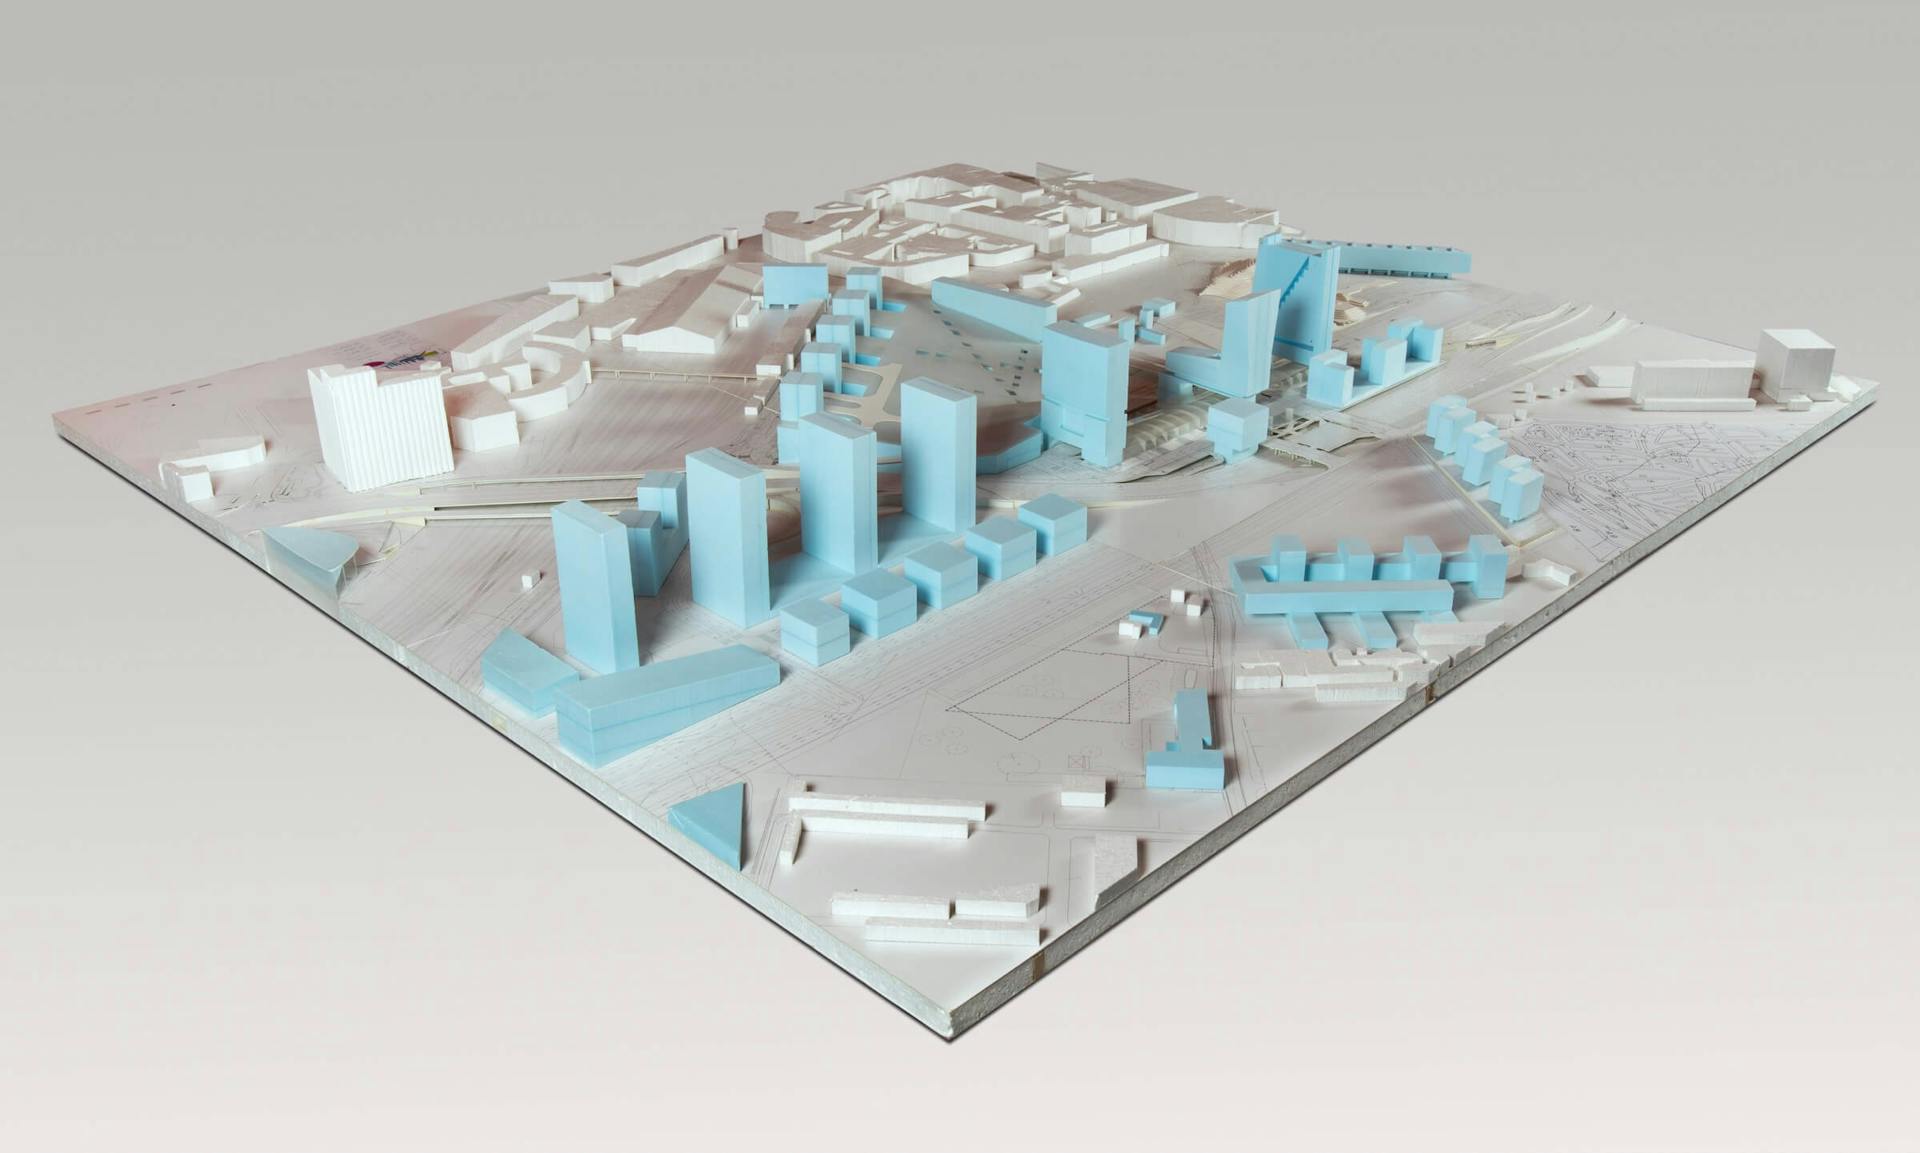 Euralille Model of the plan for the area, with high-rise buildings over the TGV station. Collection: NAI, OMAR 